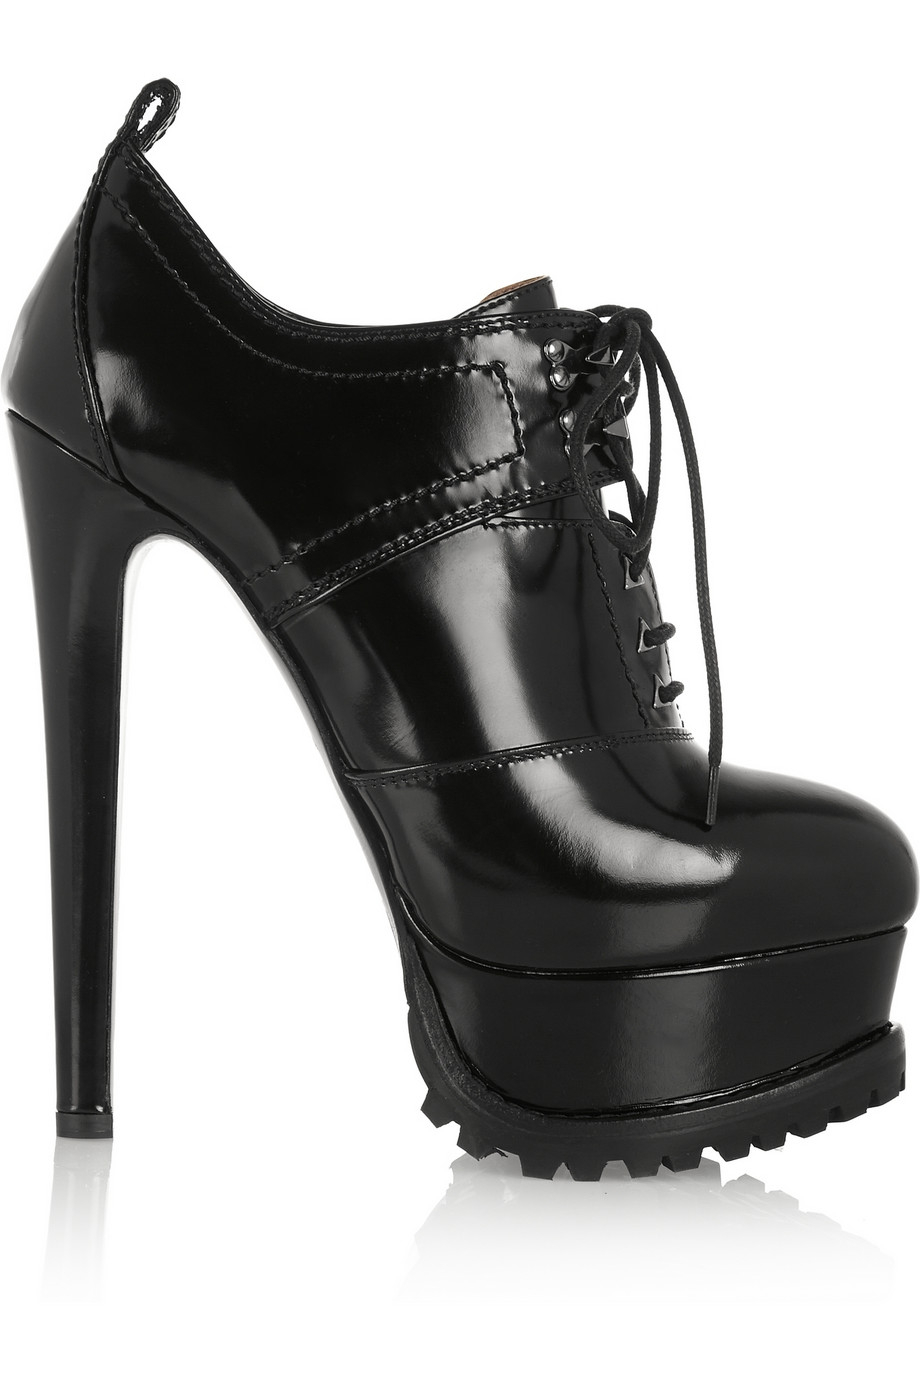 Alaïa Lace-Up Patent-Leather Ankle Boots in Black - Lyst